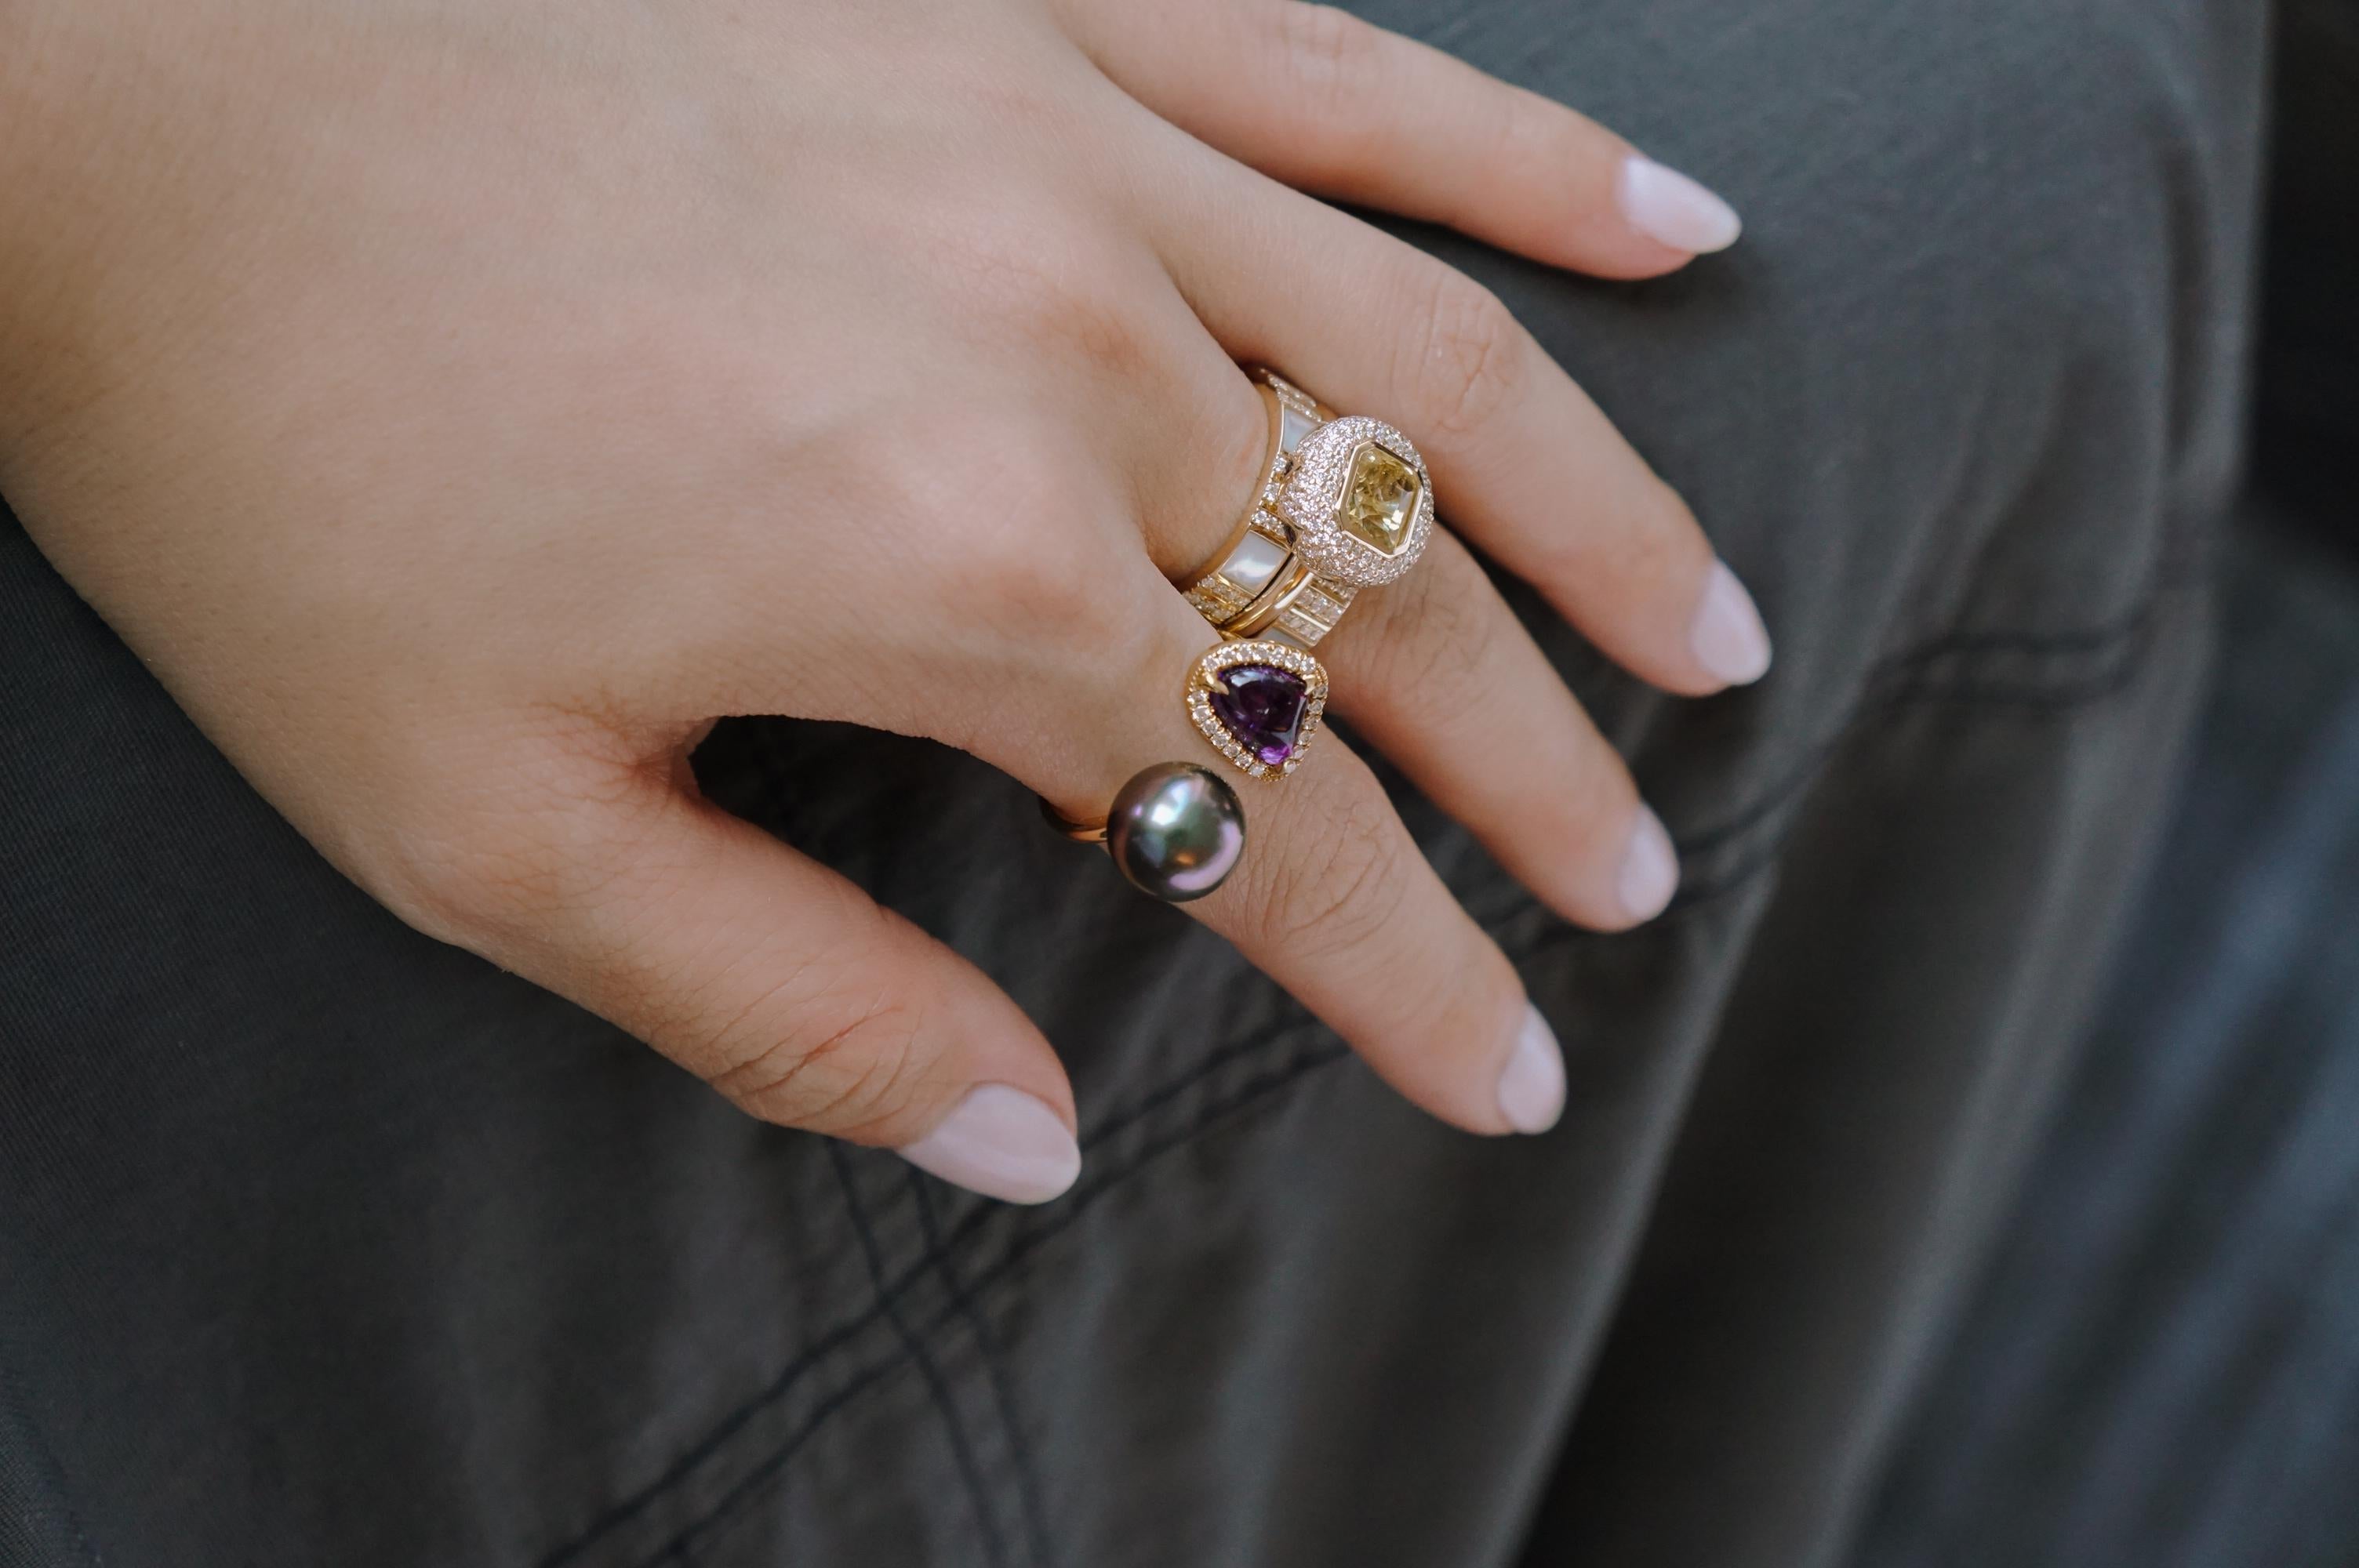 A contrast of a soft, organic form and a minimal, geometric sphere makes Ri Noor's Purple Sapphire and Tahitian Pearl and Diamond Ring a bold statement-making cocktail ring. The 18k yellow gold band wraps around the wearer's finger, presenting on